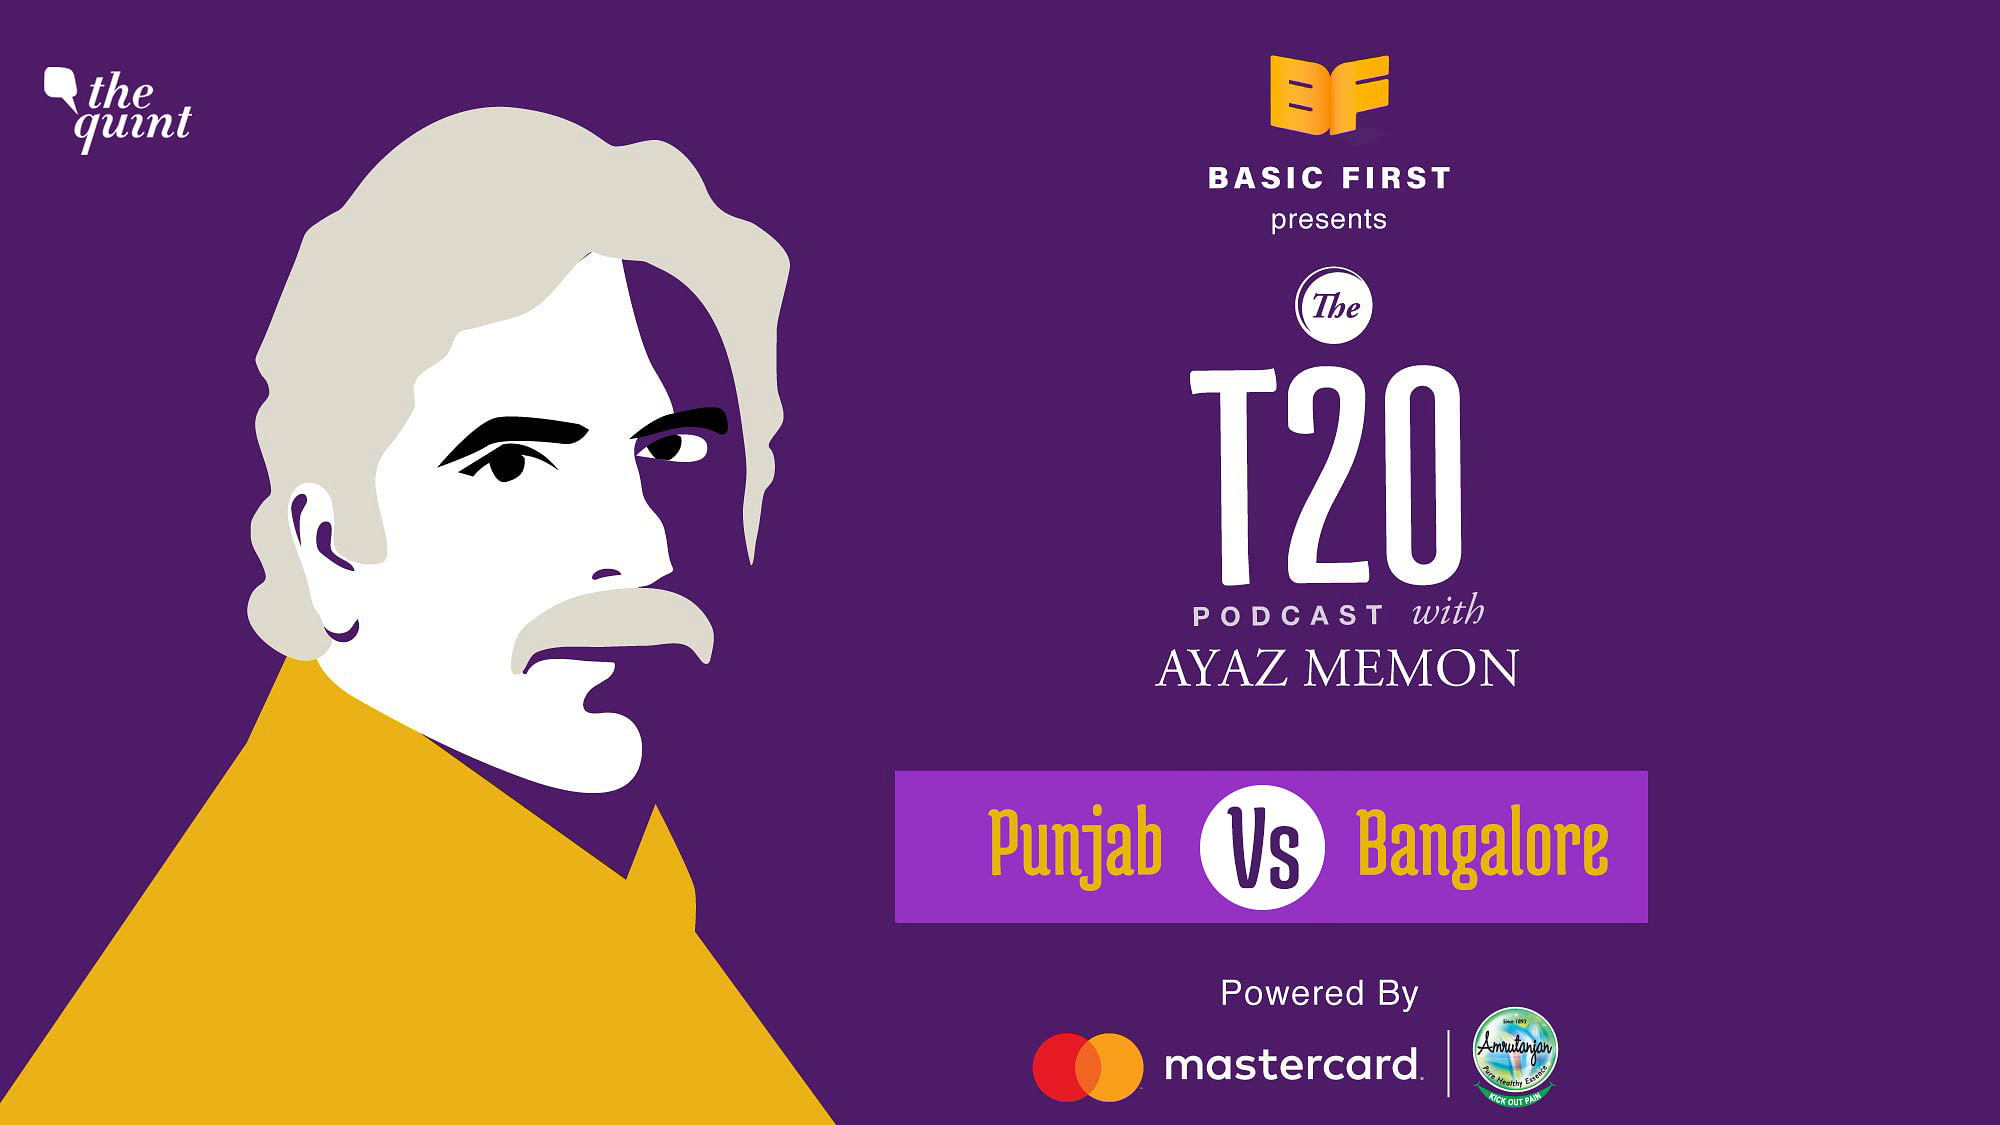 On Episode 31 of The T20 Podcast, Ayaz Memon and Mendra Dorjey talk about Punjab’s 8 wicket victory over Bangalore - just their second win of the season.